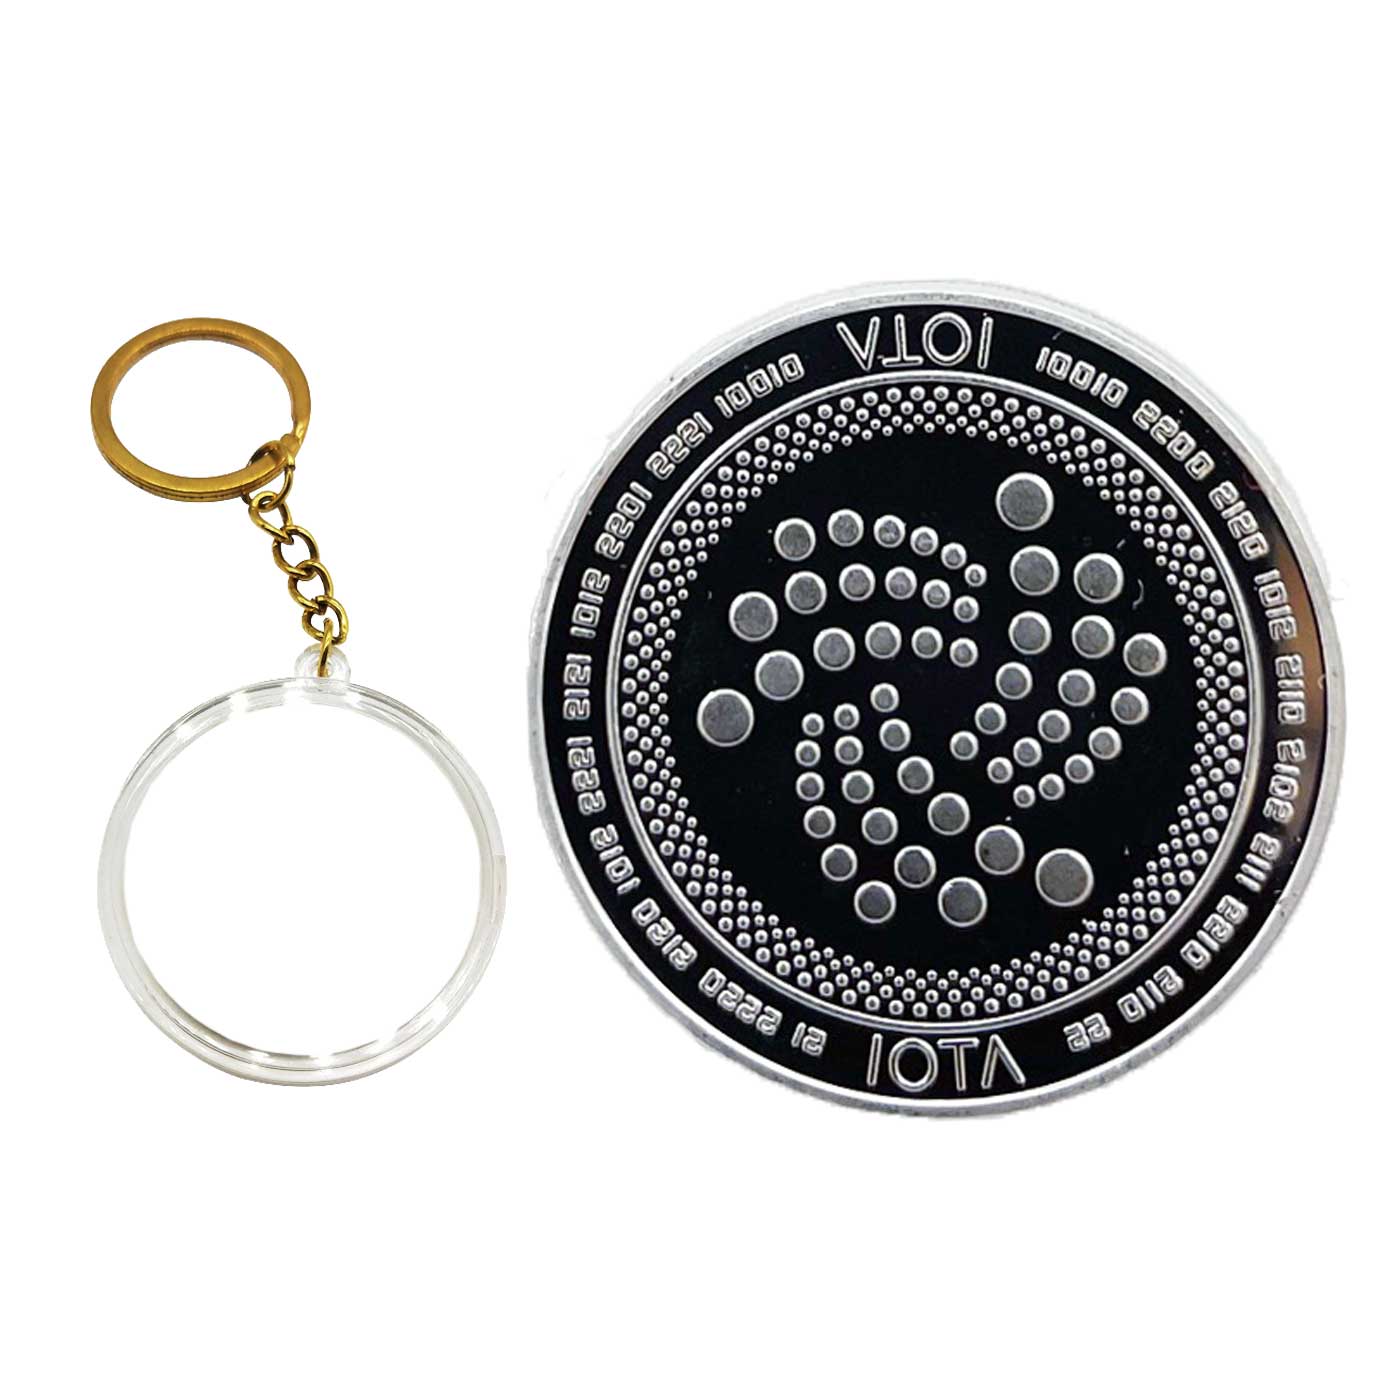 Cryptocurrency Collectors Edition 40mm Crypto Coin Keychain Capsule Set Bitcoin